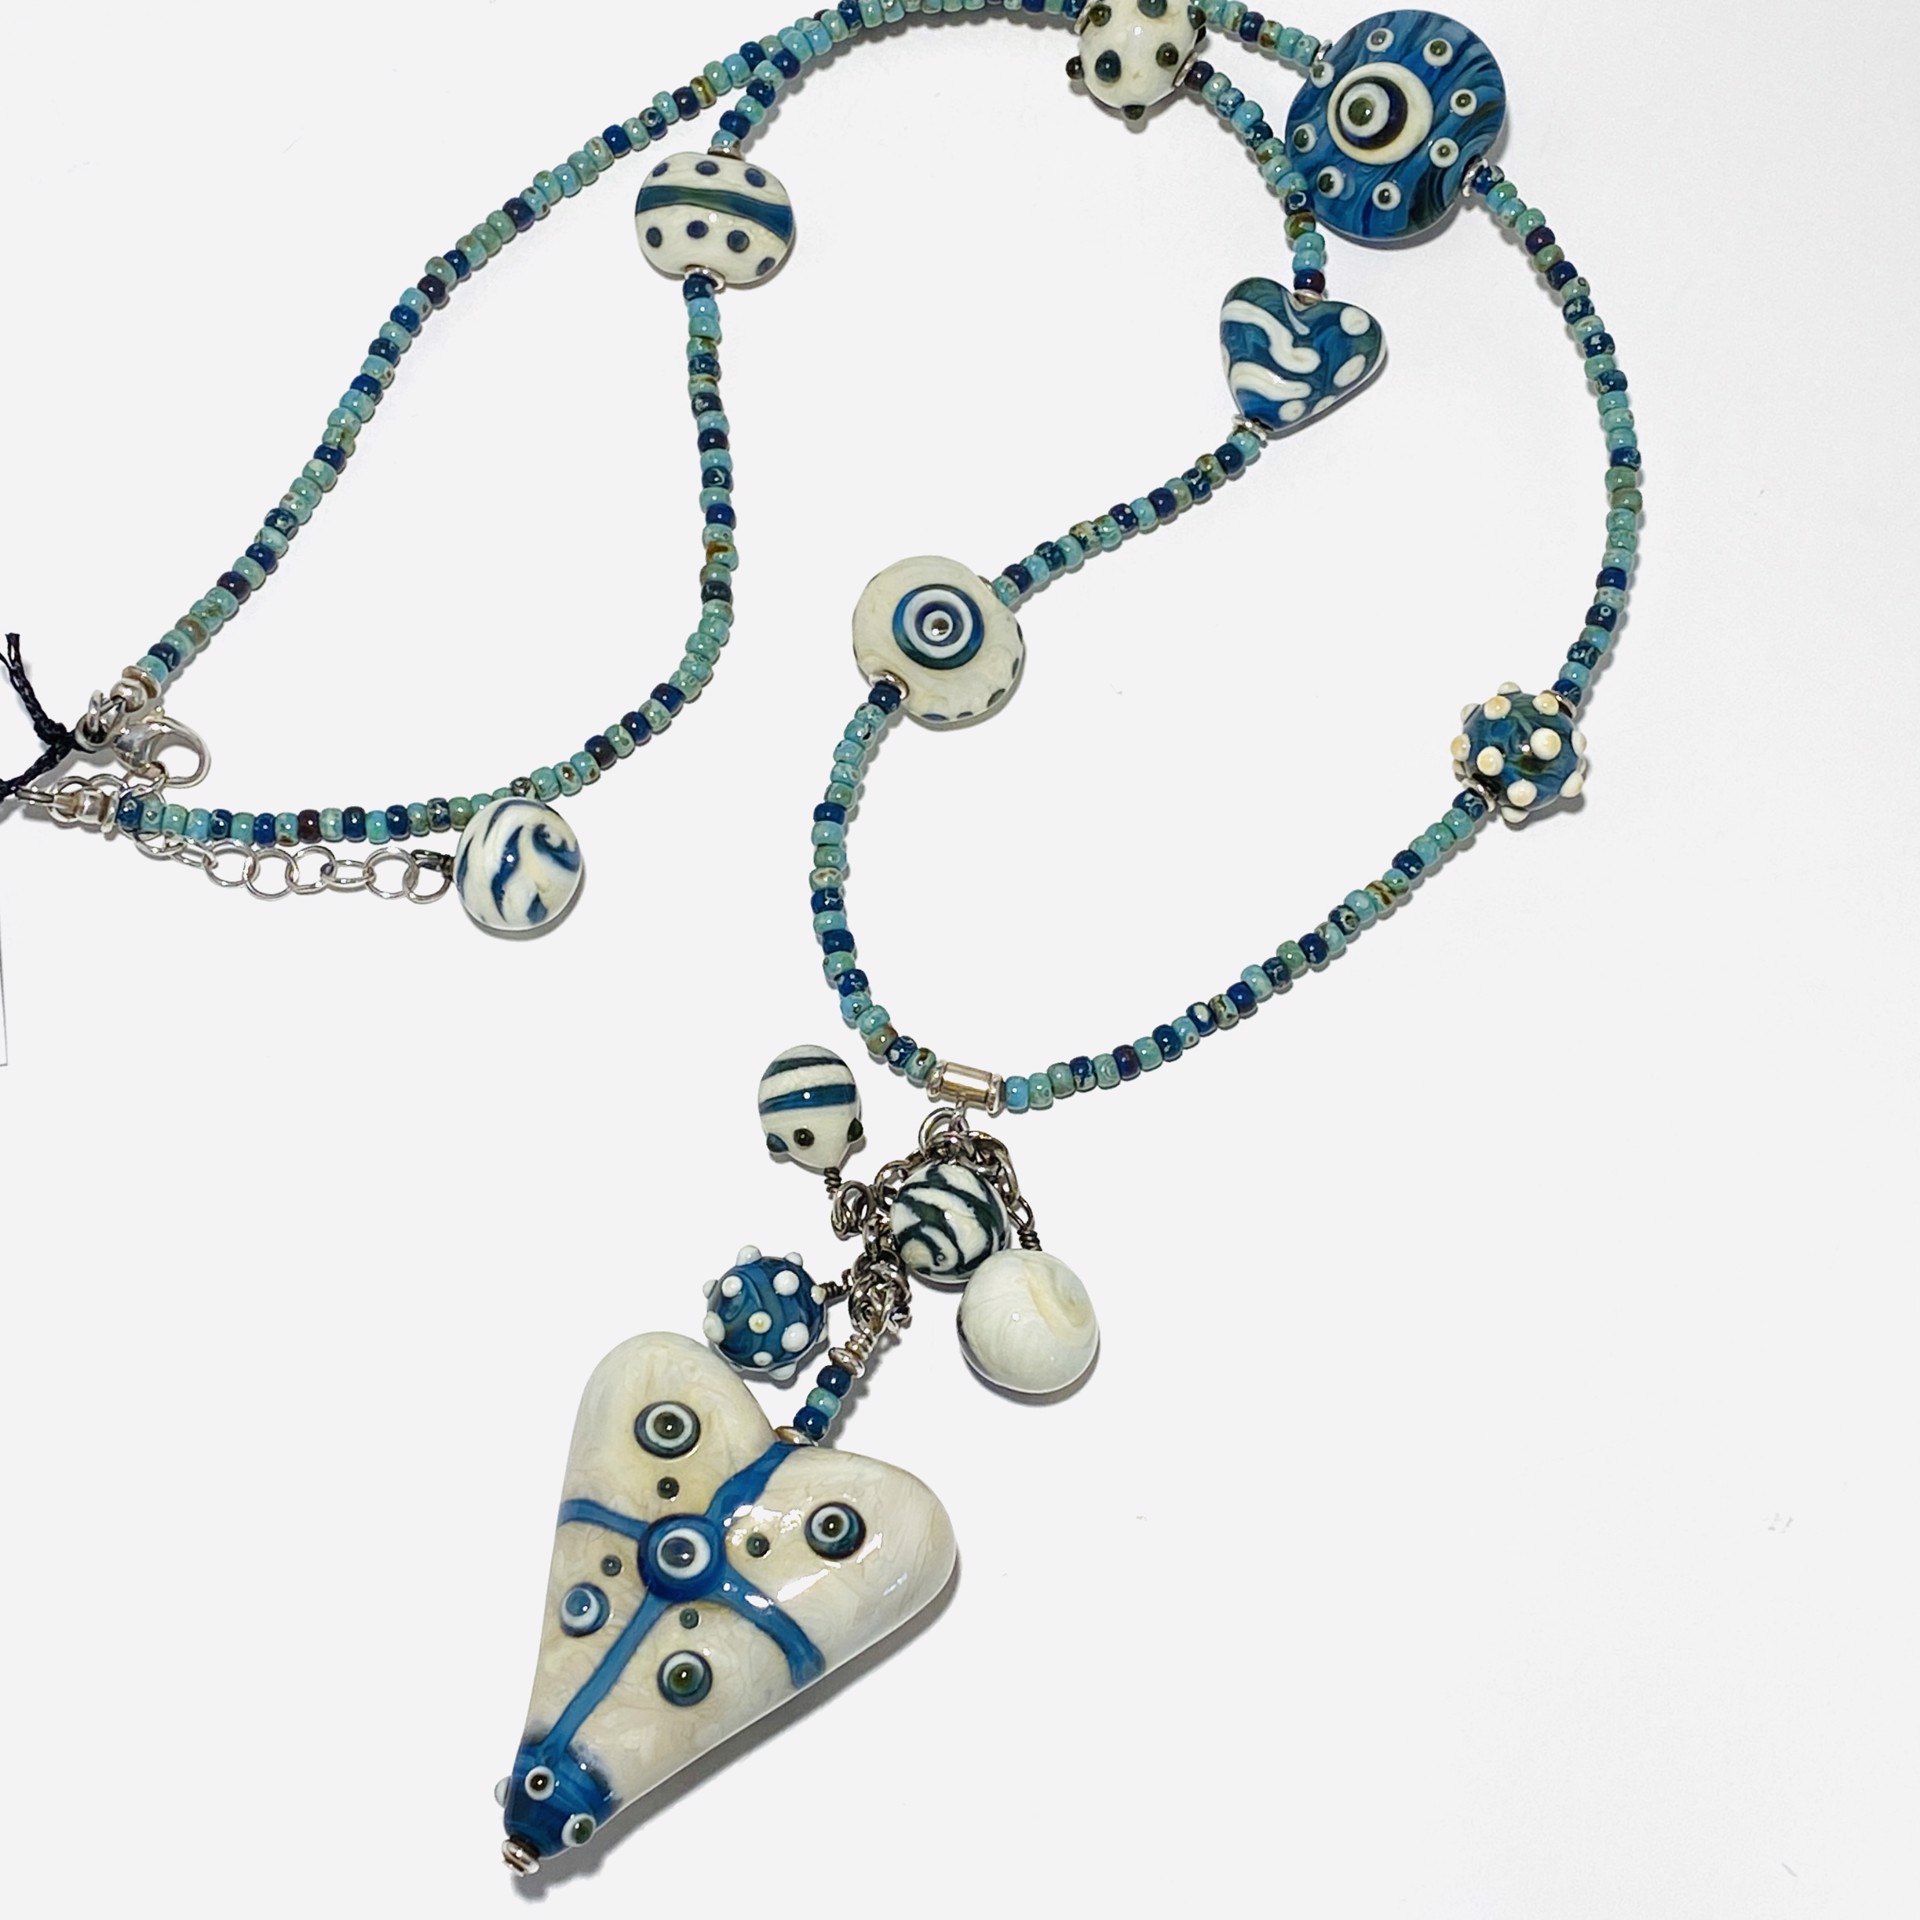 White and Blue Averio Kronos Heart Multi Bead Cluster Beaded Necklace LS23-1A by Linda Sacra